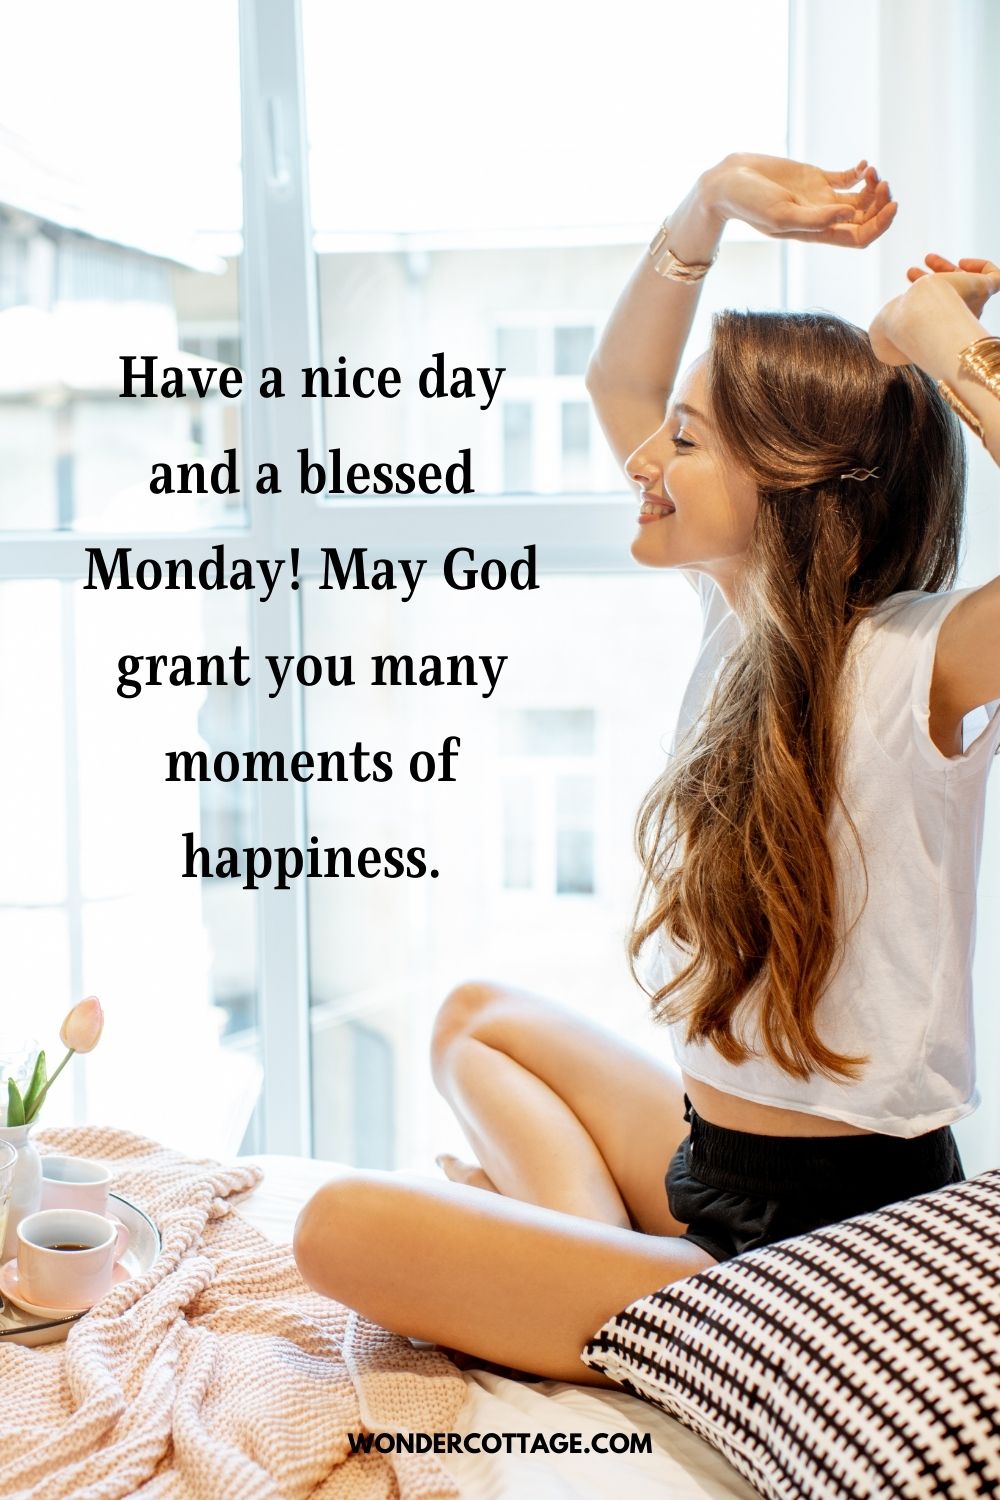 Have a nice day and a blessed Monday! May God grant you many moments of happiness.